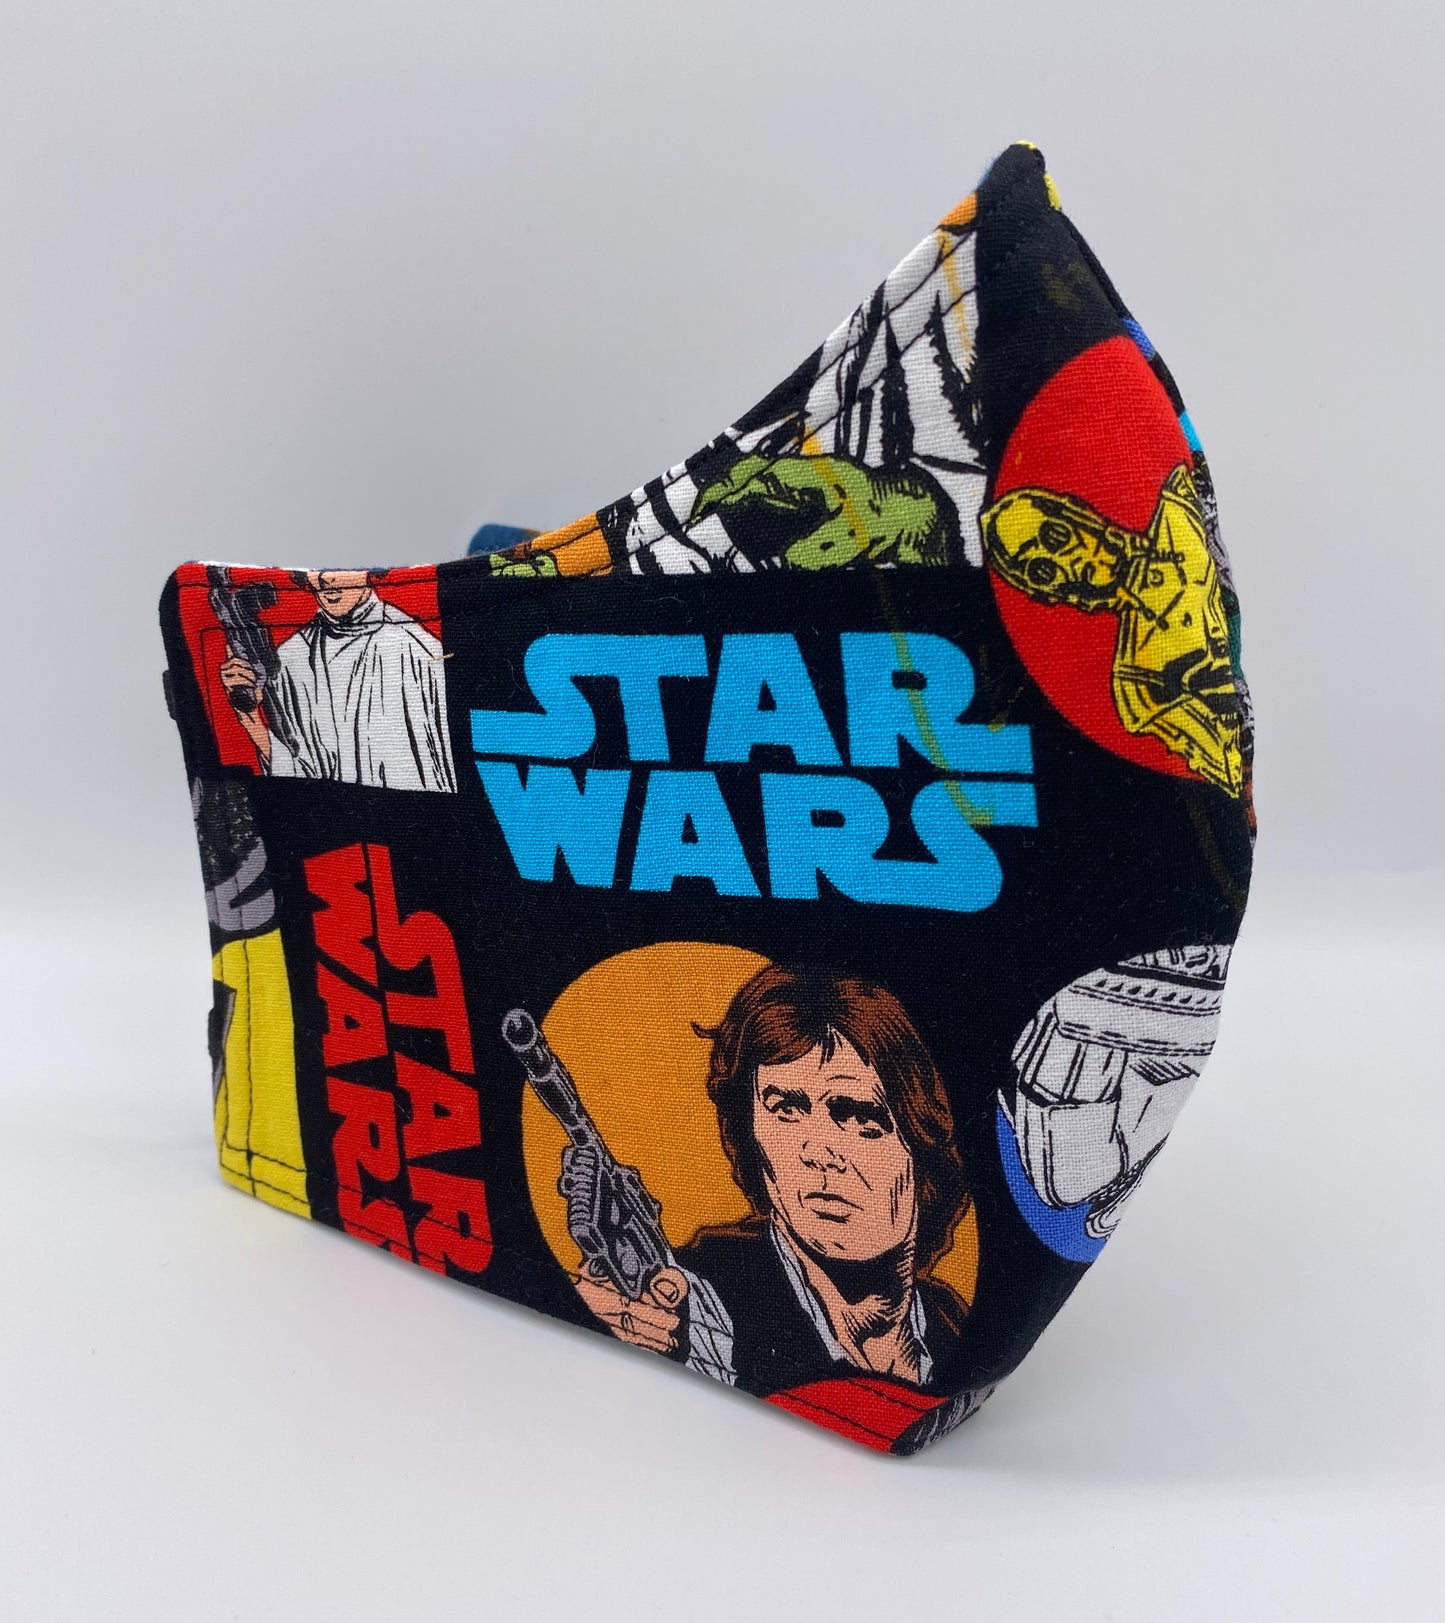 LIMITED EDITION - Star Wars Profiles: Contoured Adult Face Masks (One Size Fits Most; Ages 11+)